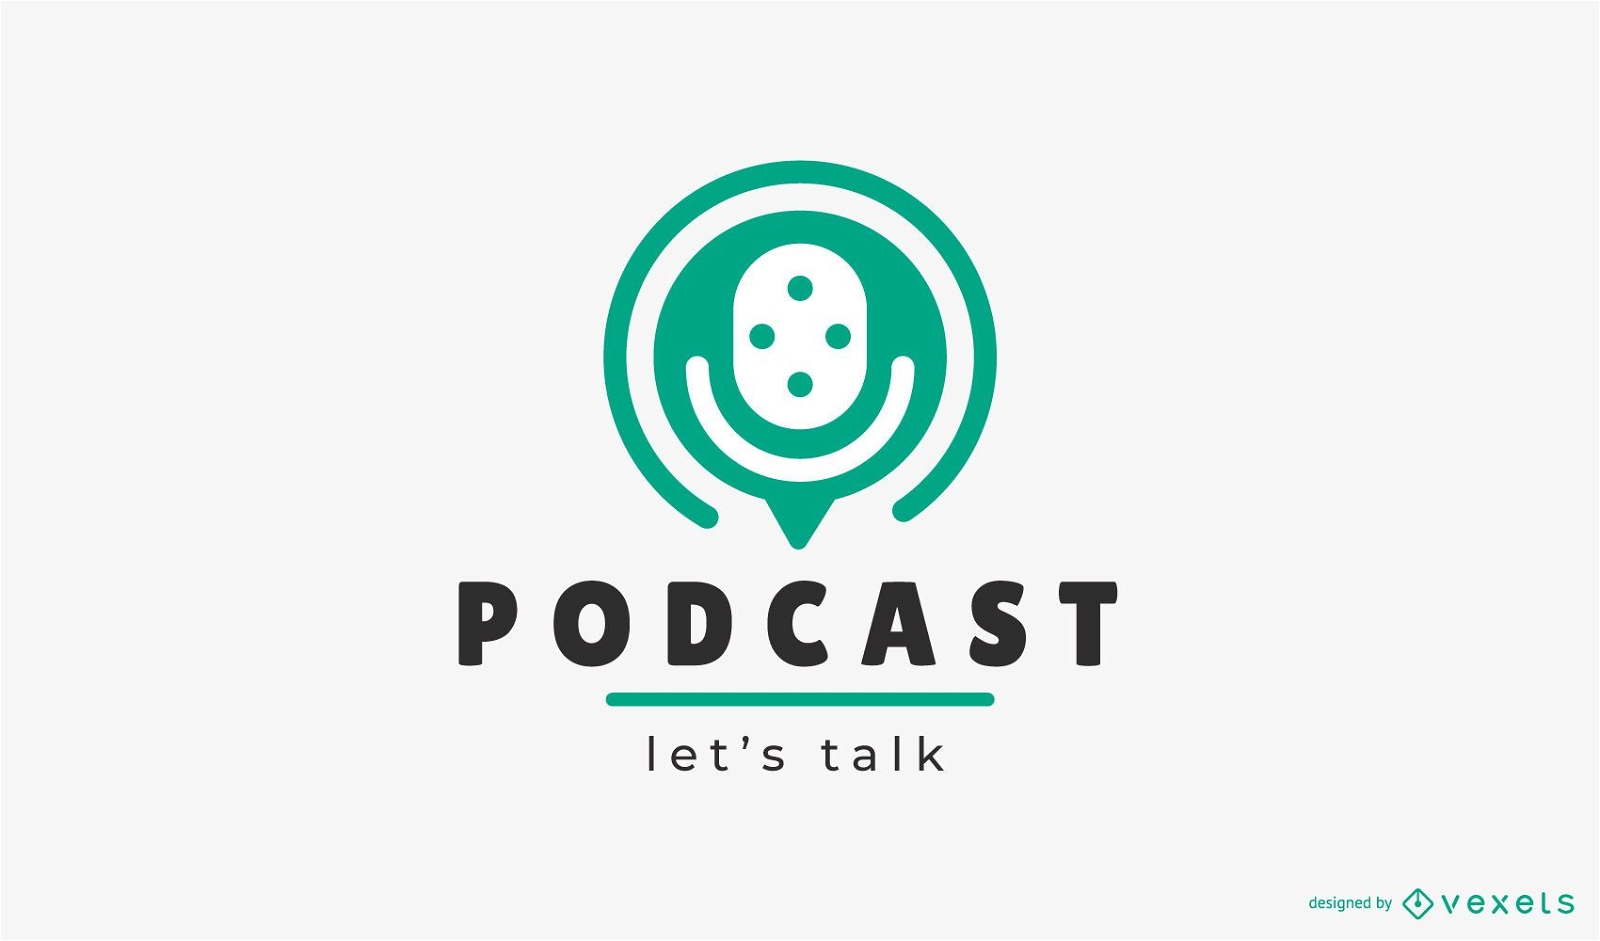 Podcast let's talk logo template